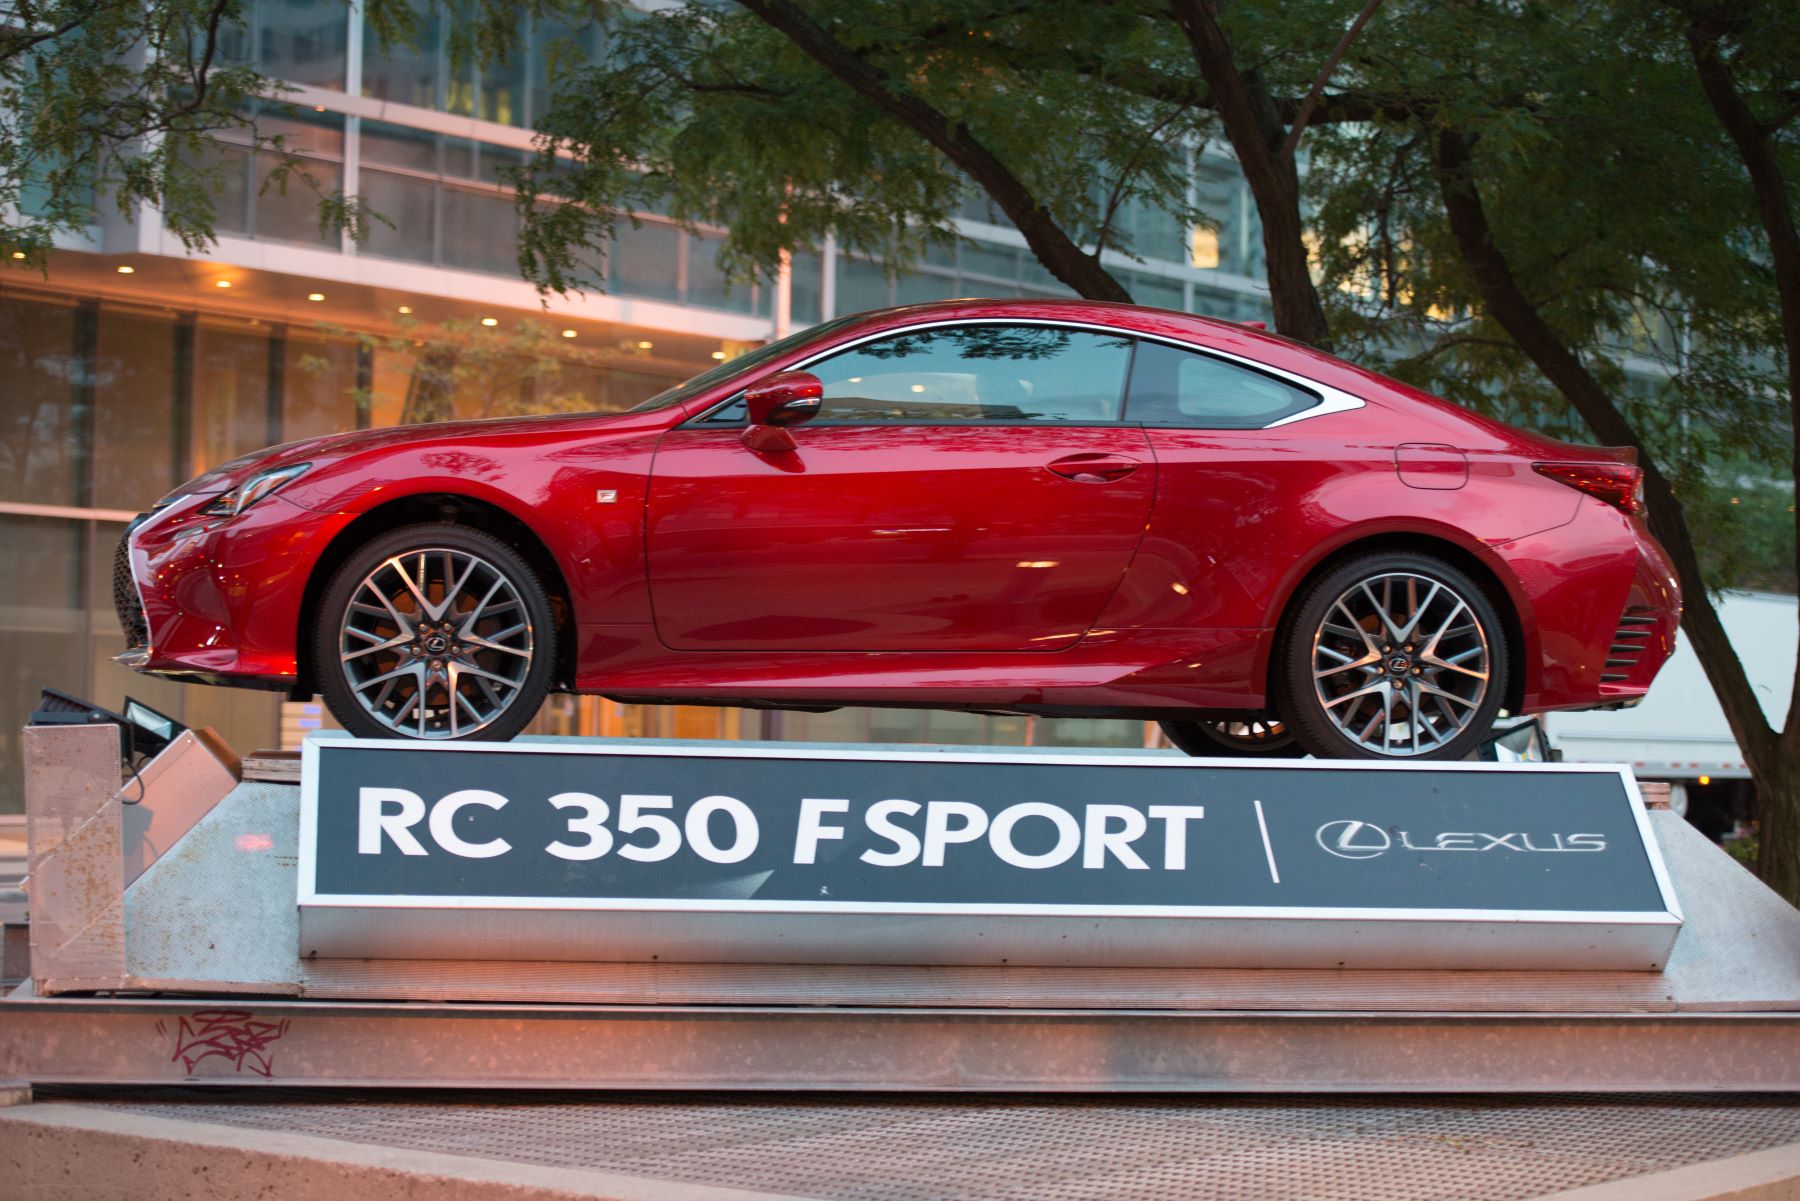 A Lexus RC 350 F Sport compact executive coupe on display in Toronto, Ontario, Canada